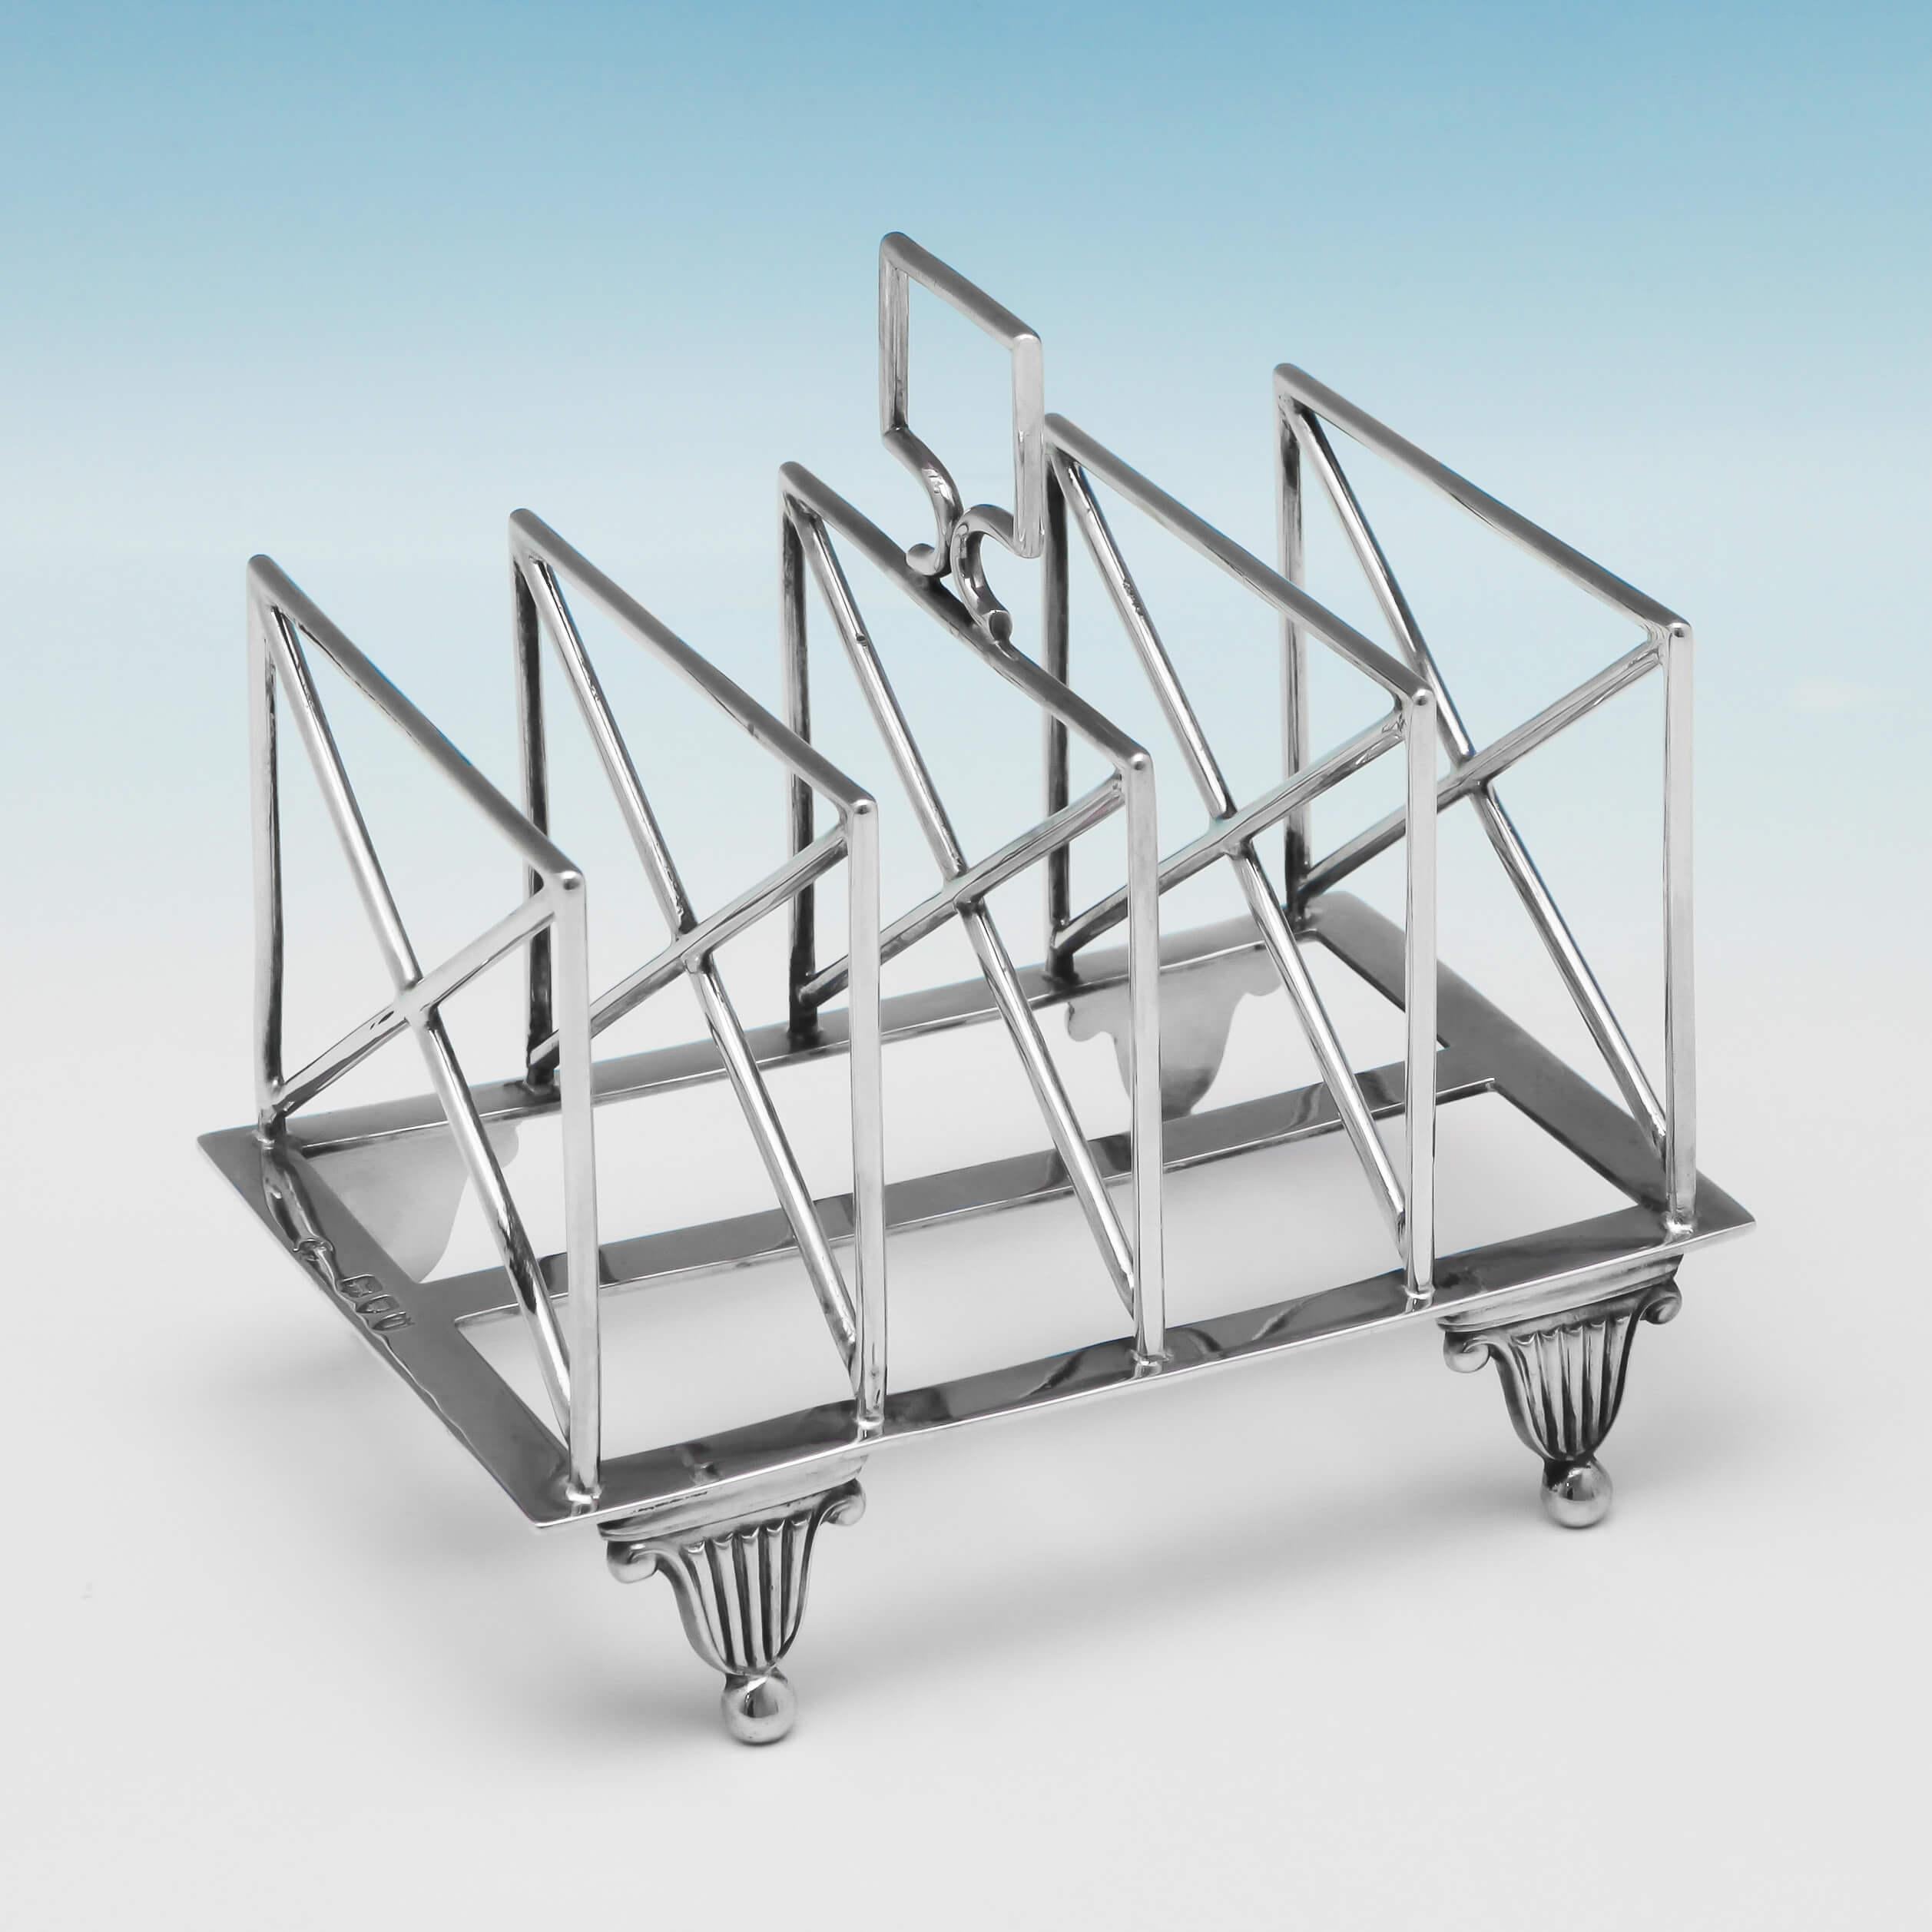 Hallmarked in London, in 1894, by William Hutton & Sons, this handsome, Victorian, antique, sterling Silver toast rack, is plain in style, and has 5 bars for toast. This toast rack measures 5